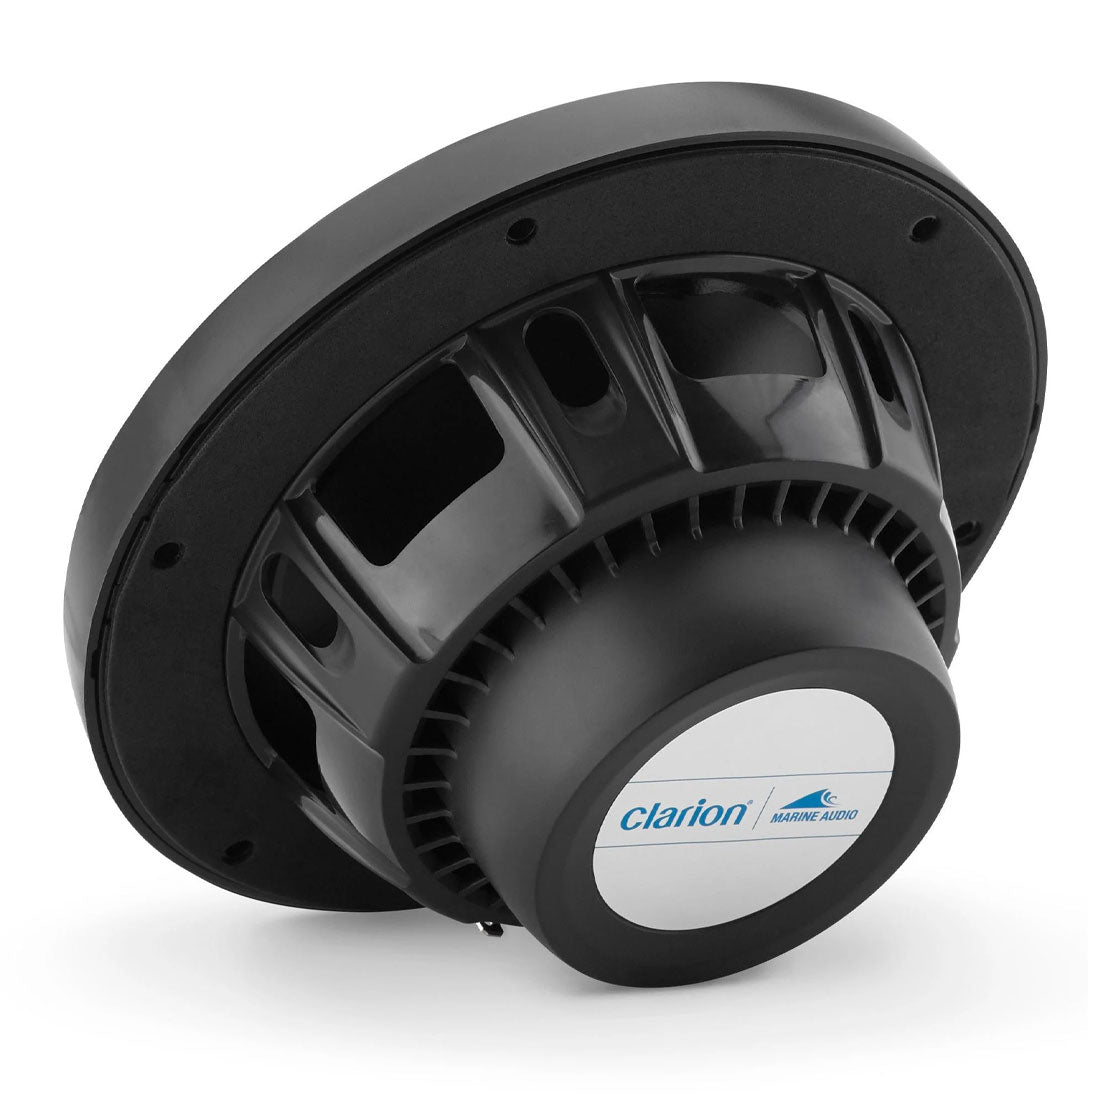 Clarion CMS-651-SWB 6.5" 2-way Marine Coaxial Speakers with Sport Grilles - #92610